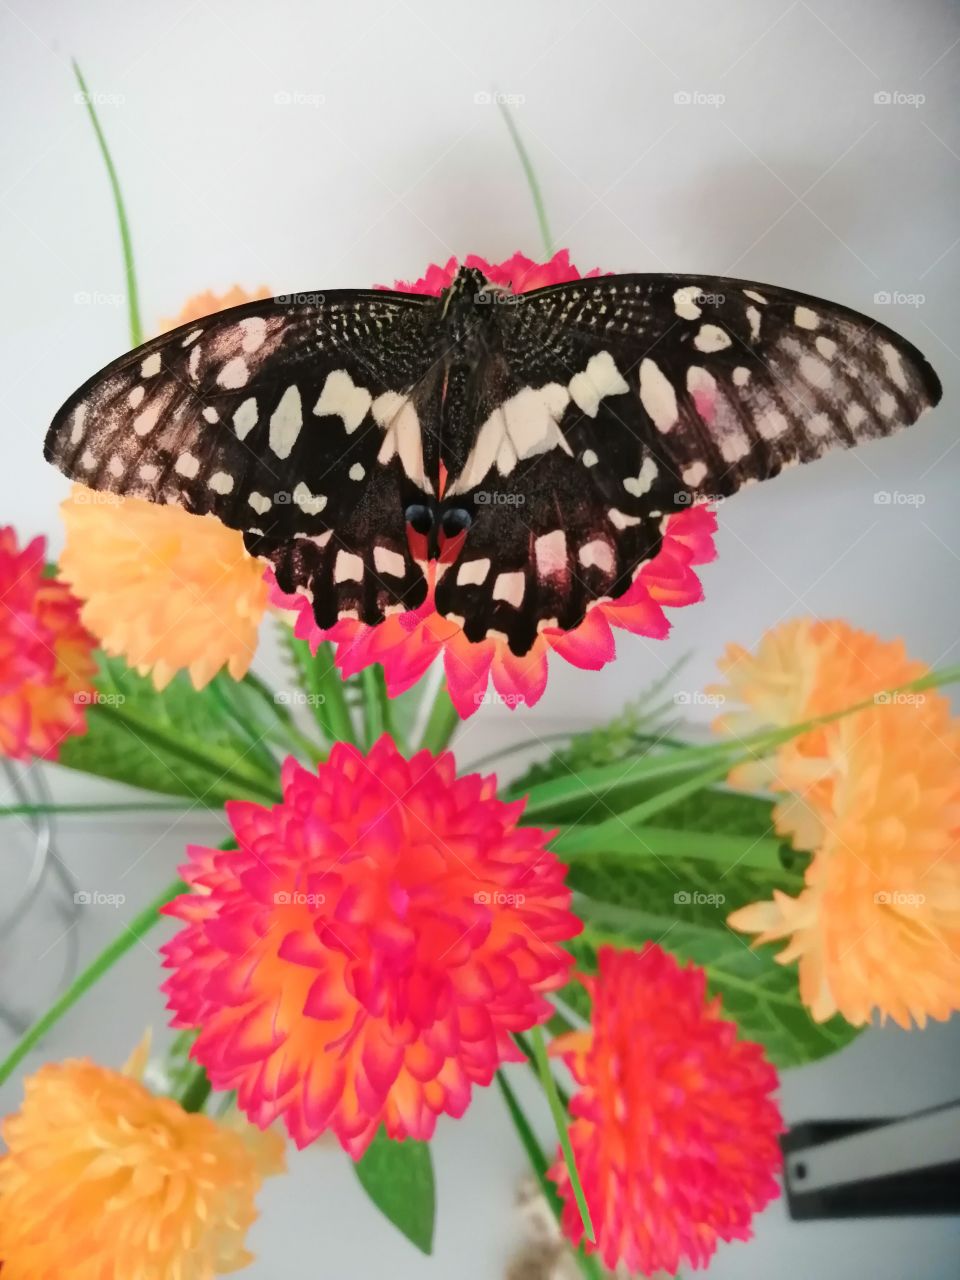 The real butterfly on the flower